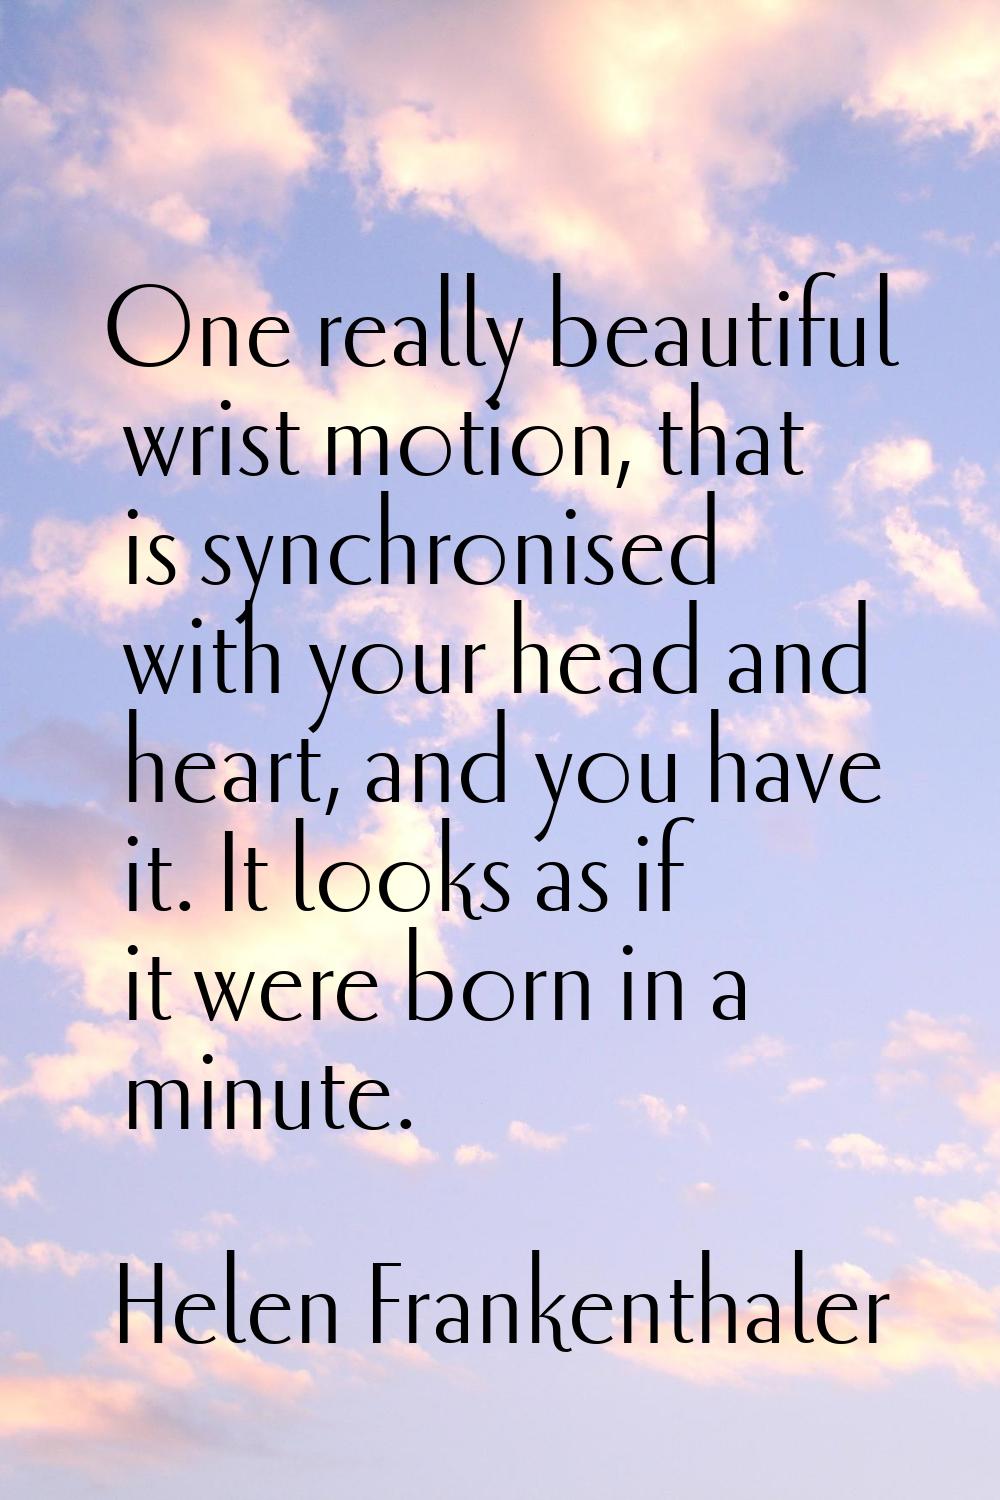 One really beautiful wrist motion, that is synchronised with your head and heart, and you have it. 